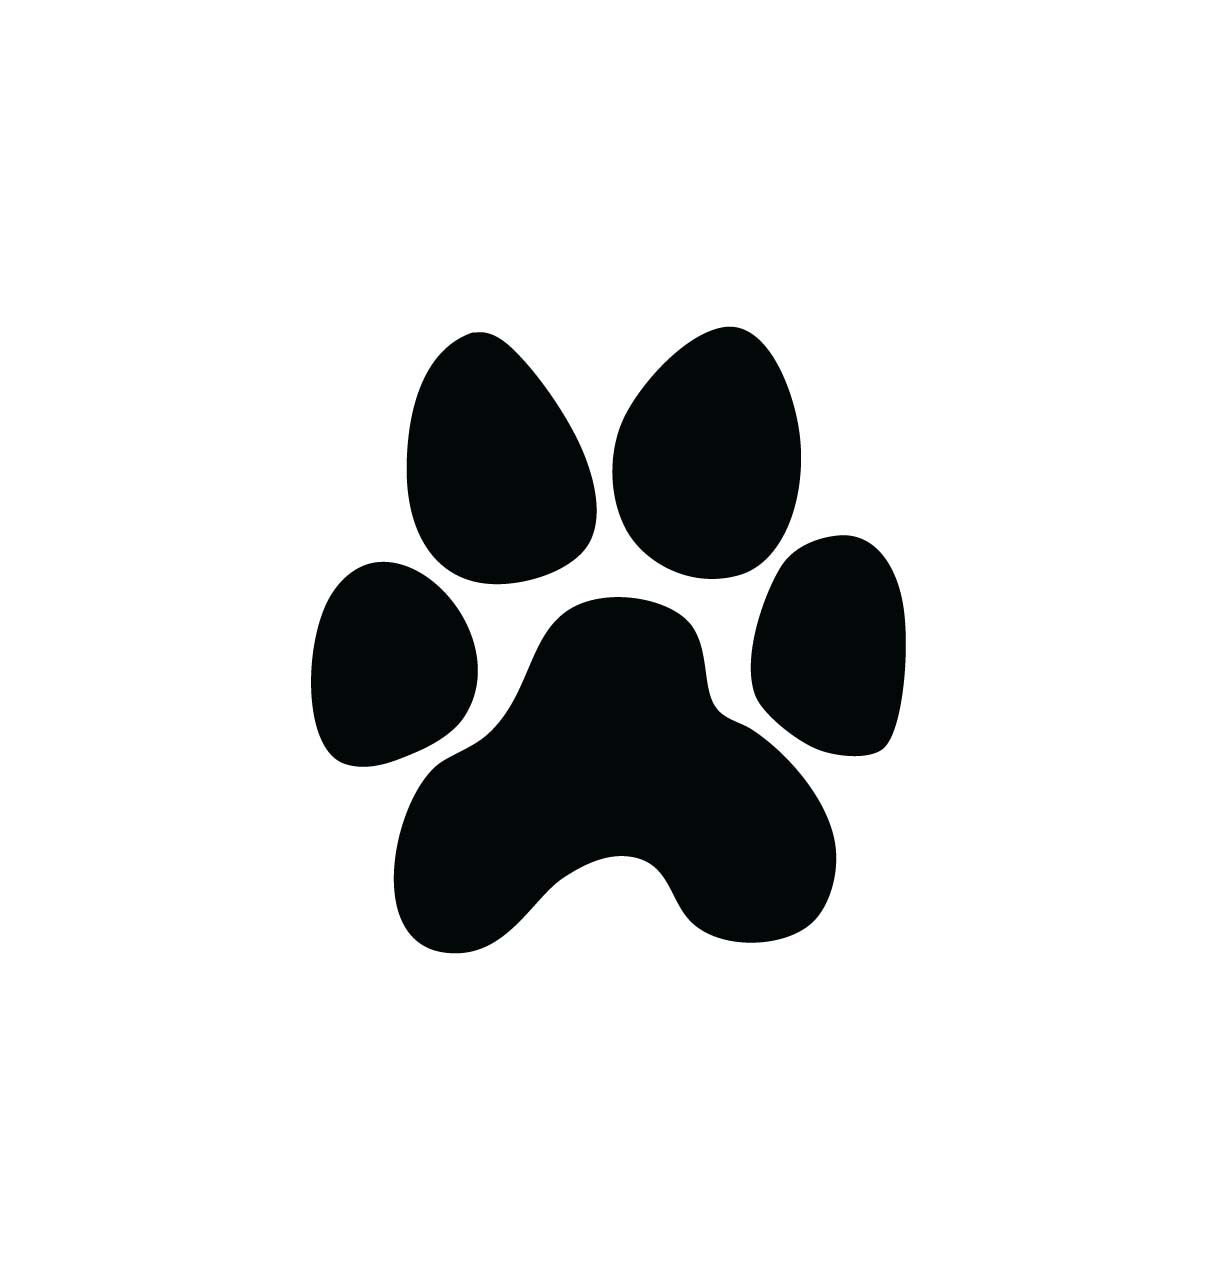 Dog paw gallery for cat clip art paw print image